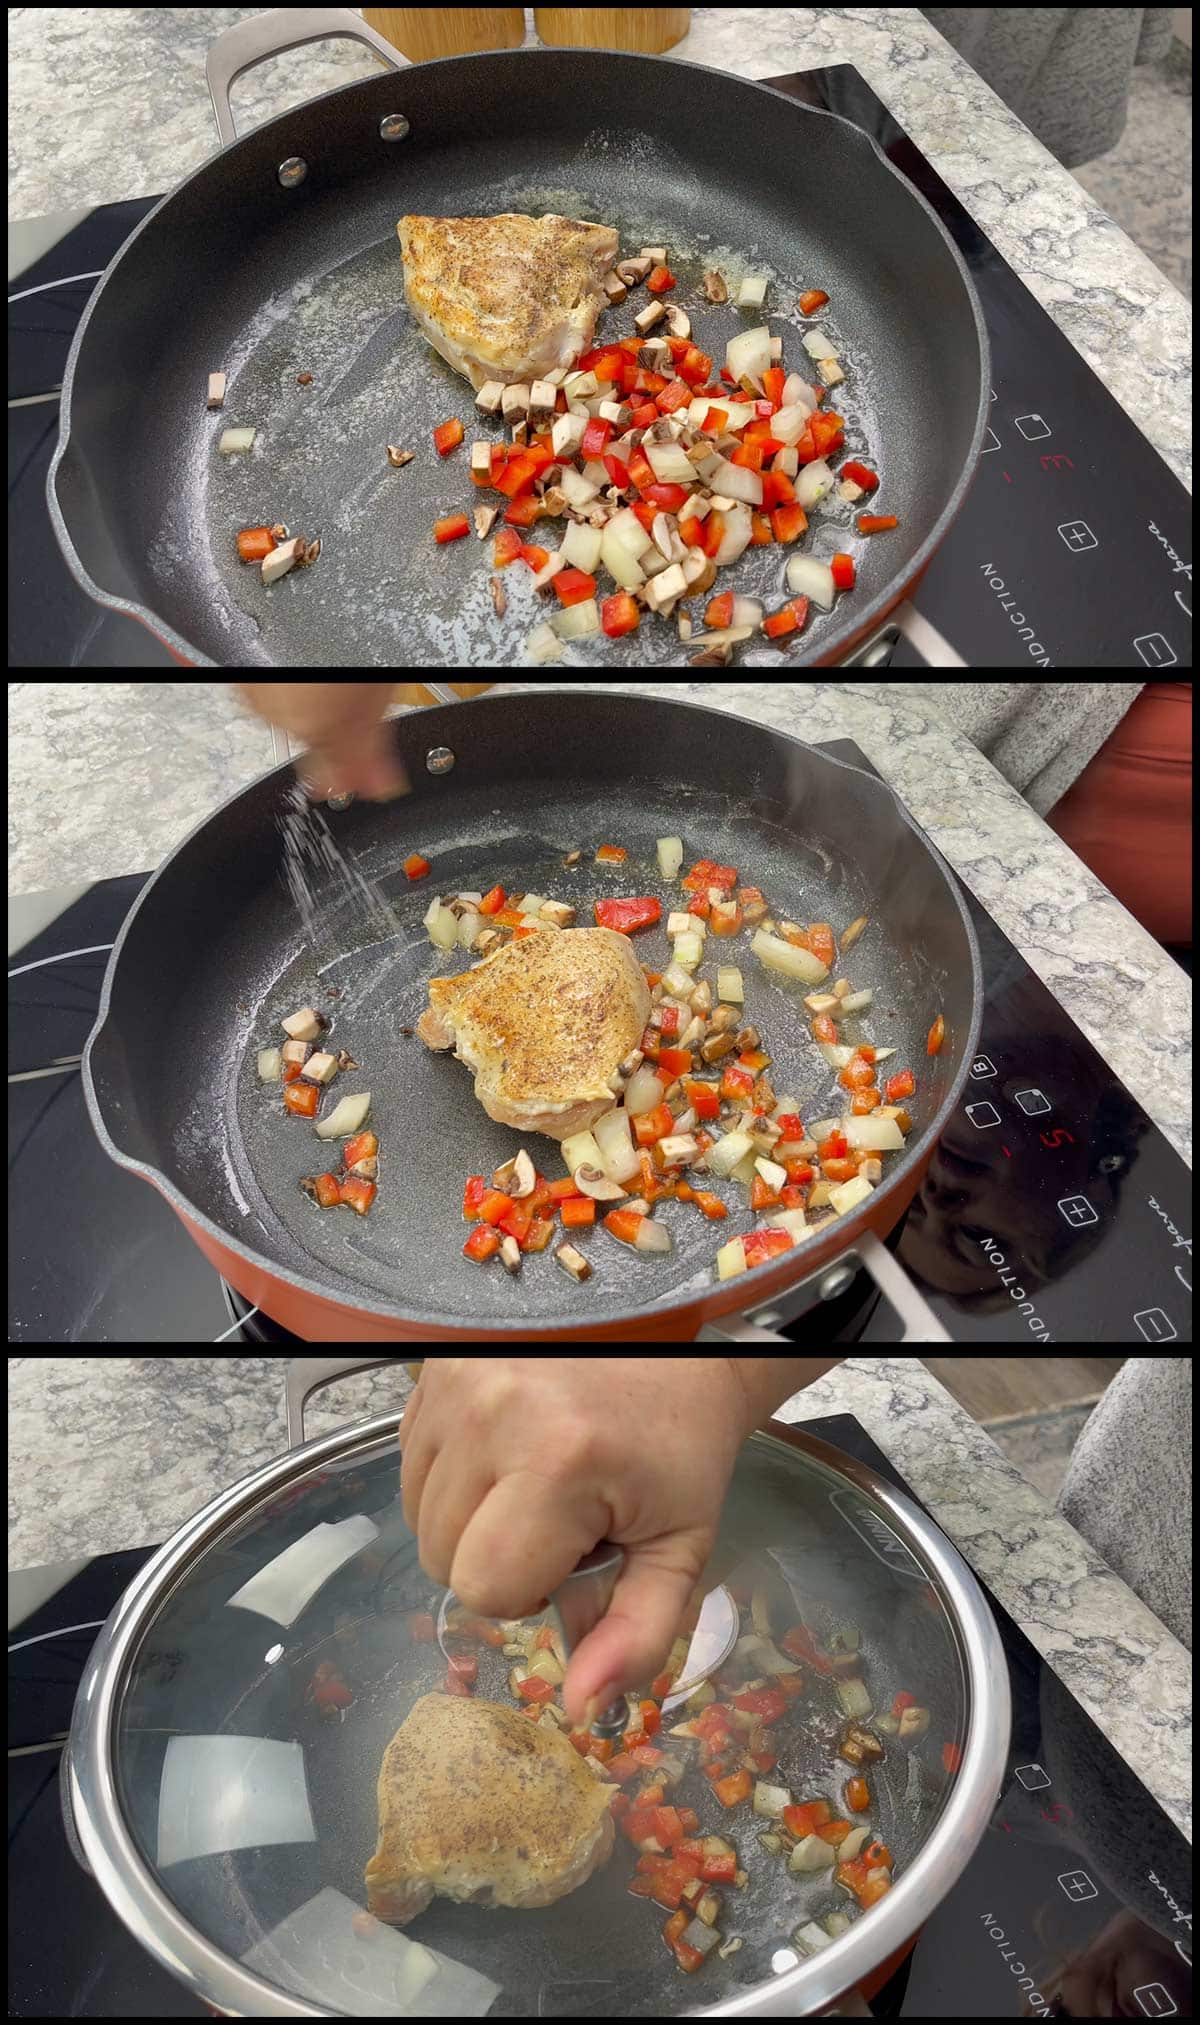 adding the vegetables to the pan with chicken to cook.